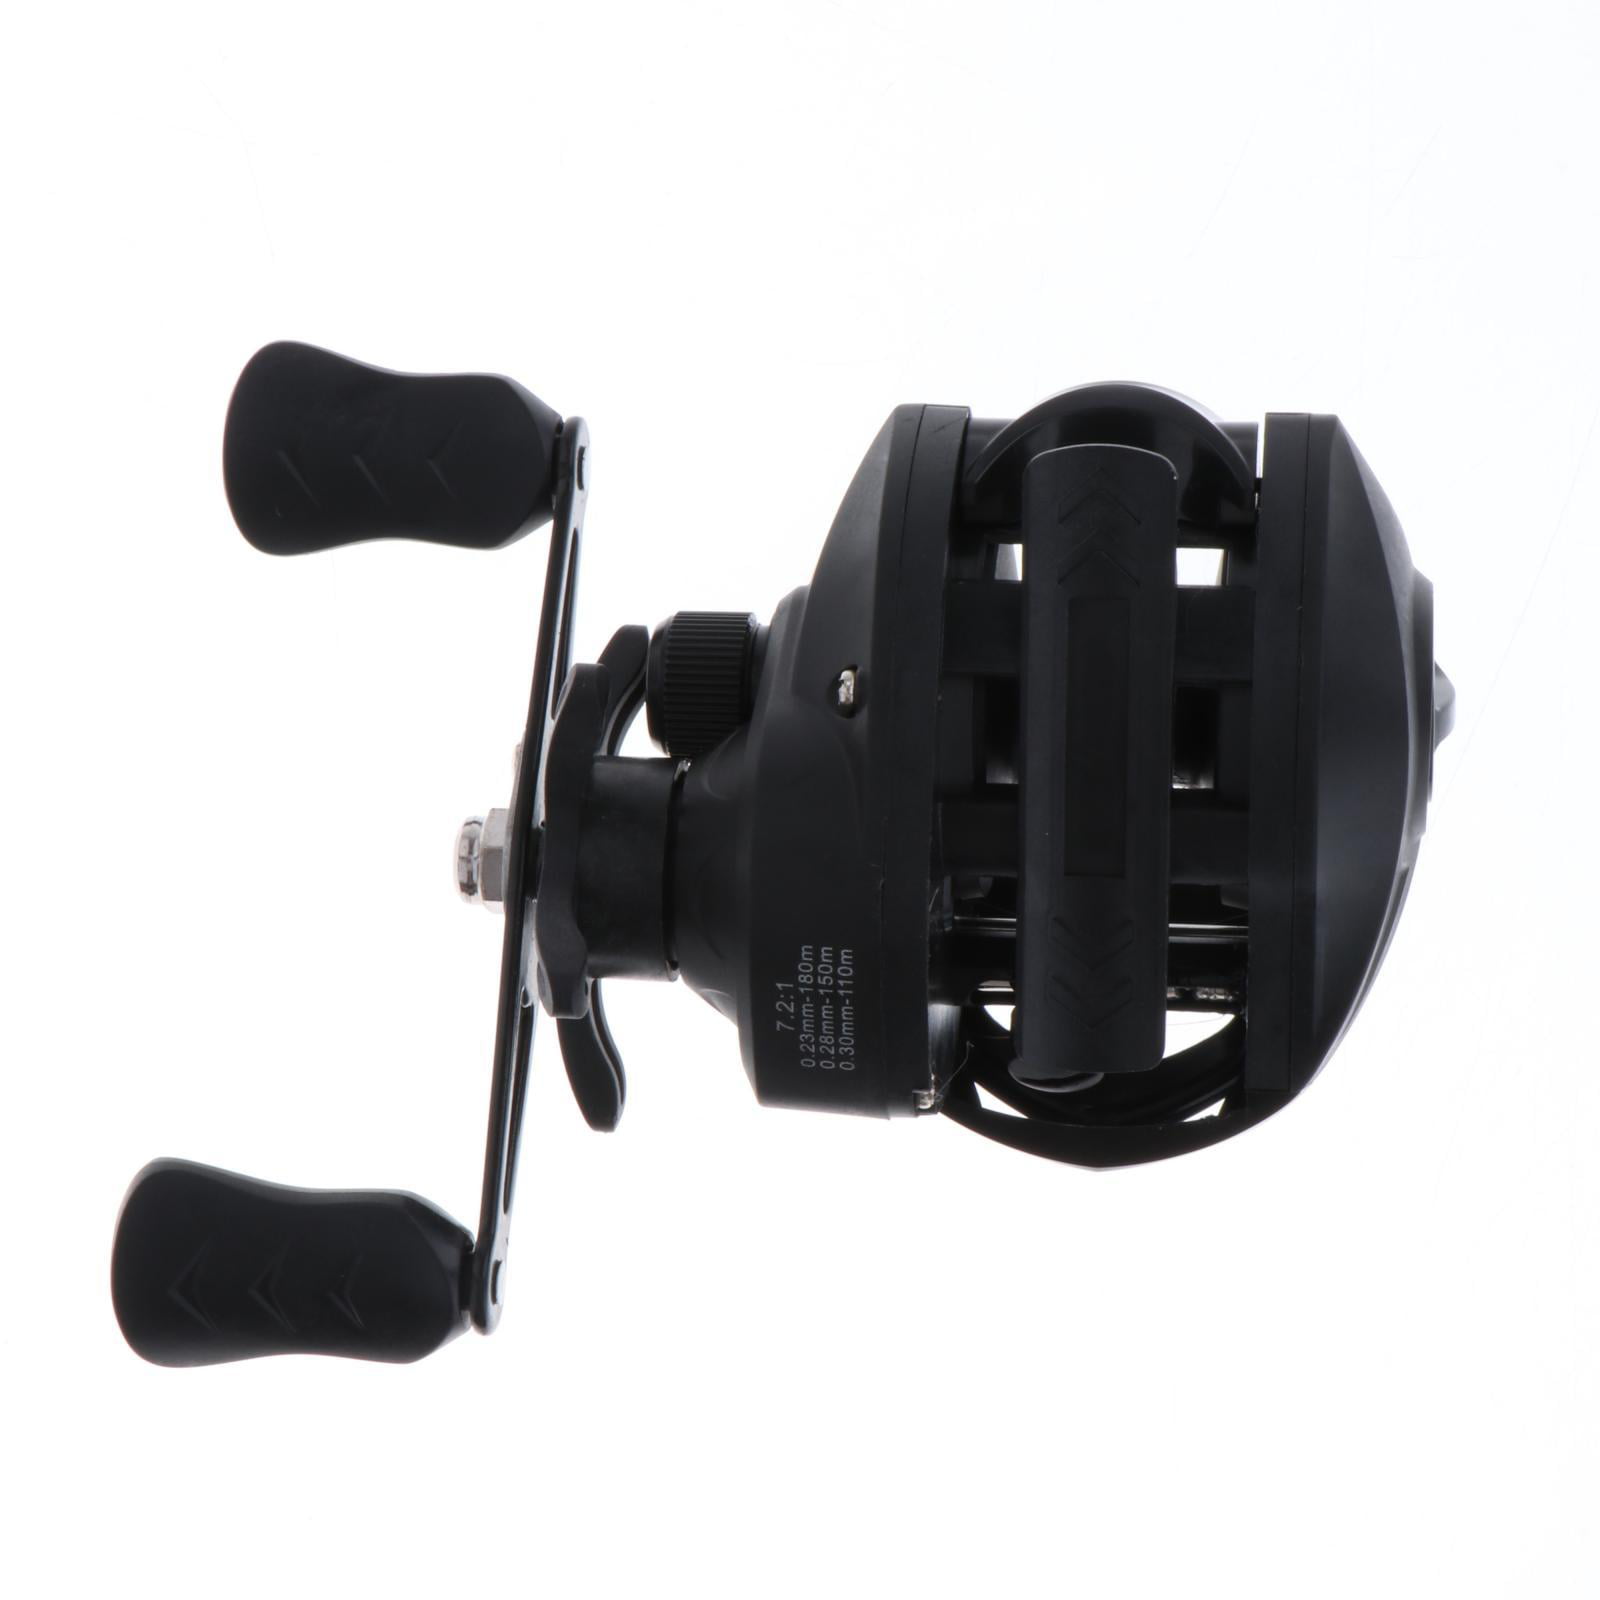 Fishing Reels, Strong Corrosion Resistance Metal Saltwater Baitcasting Reel  with Braking System - Right handed 